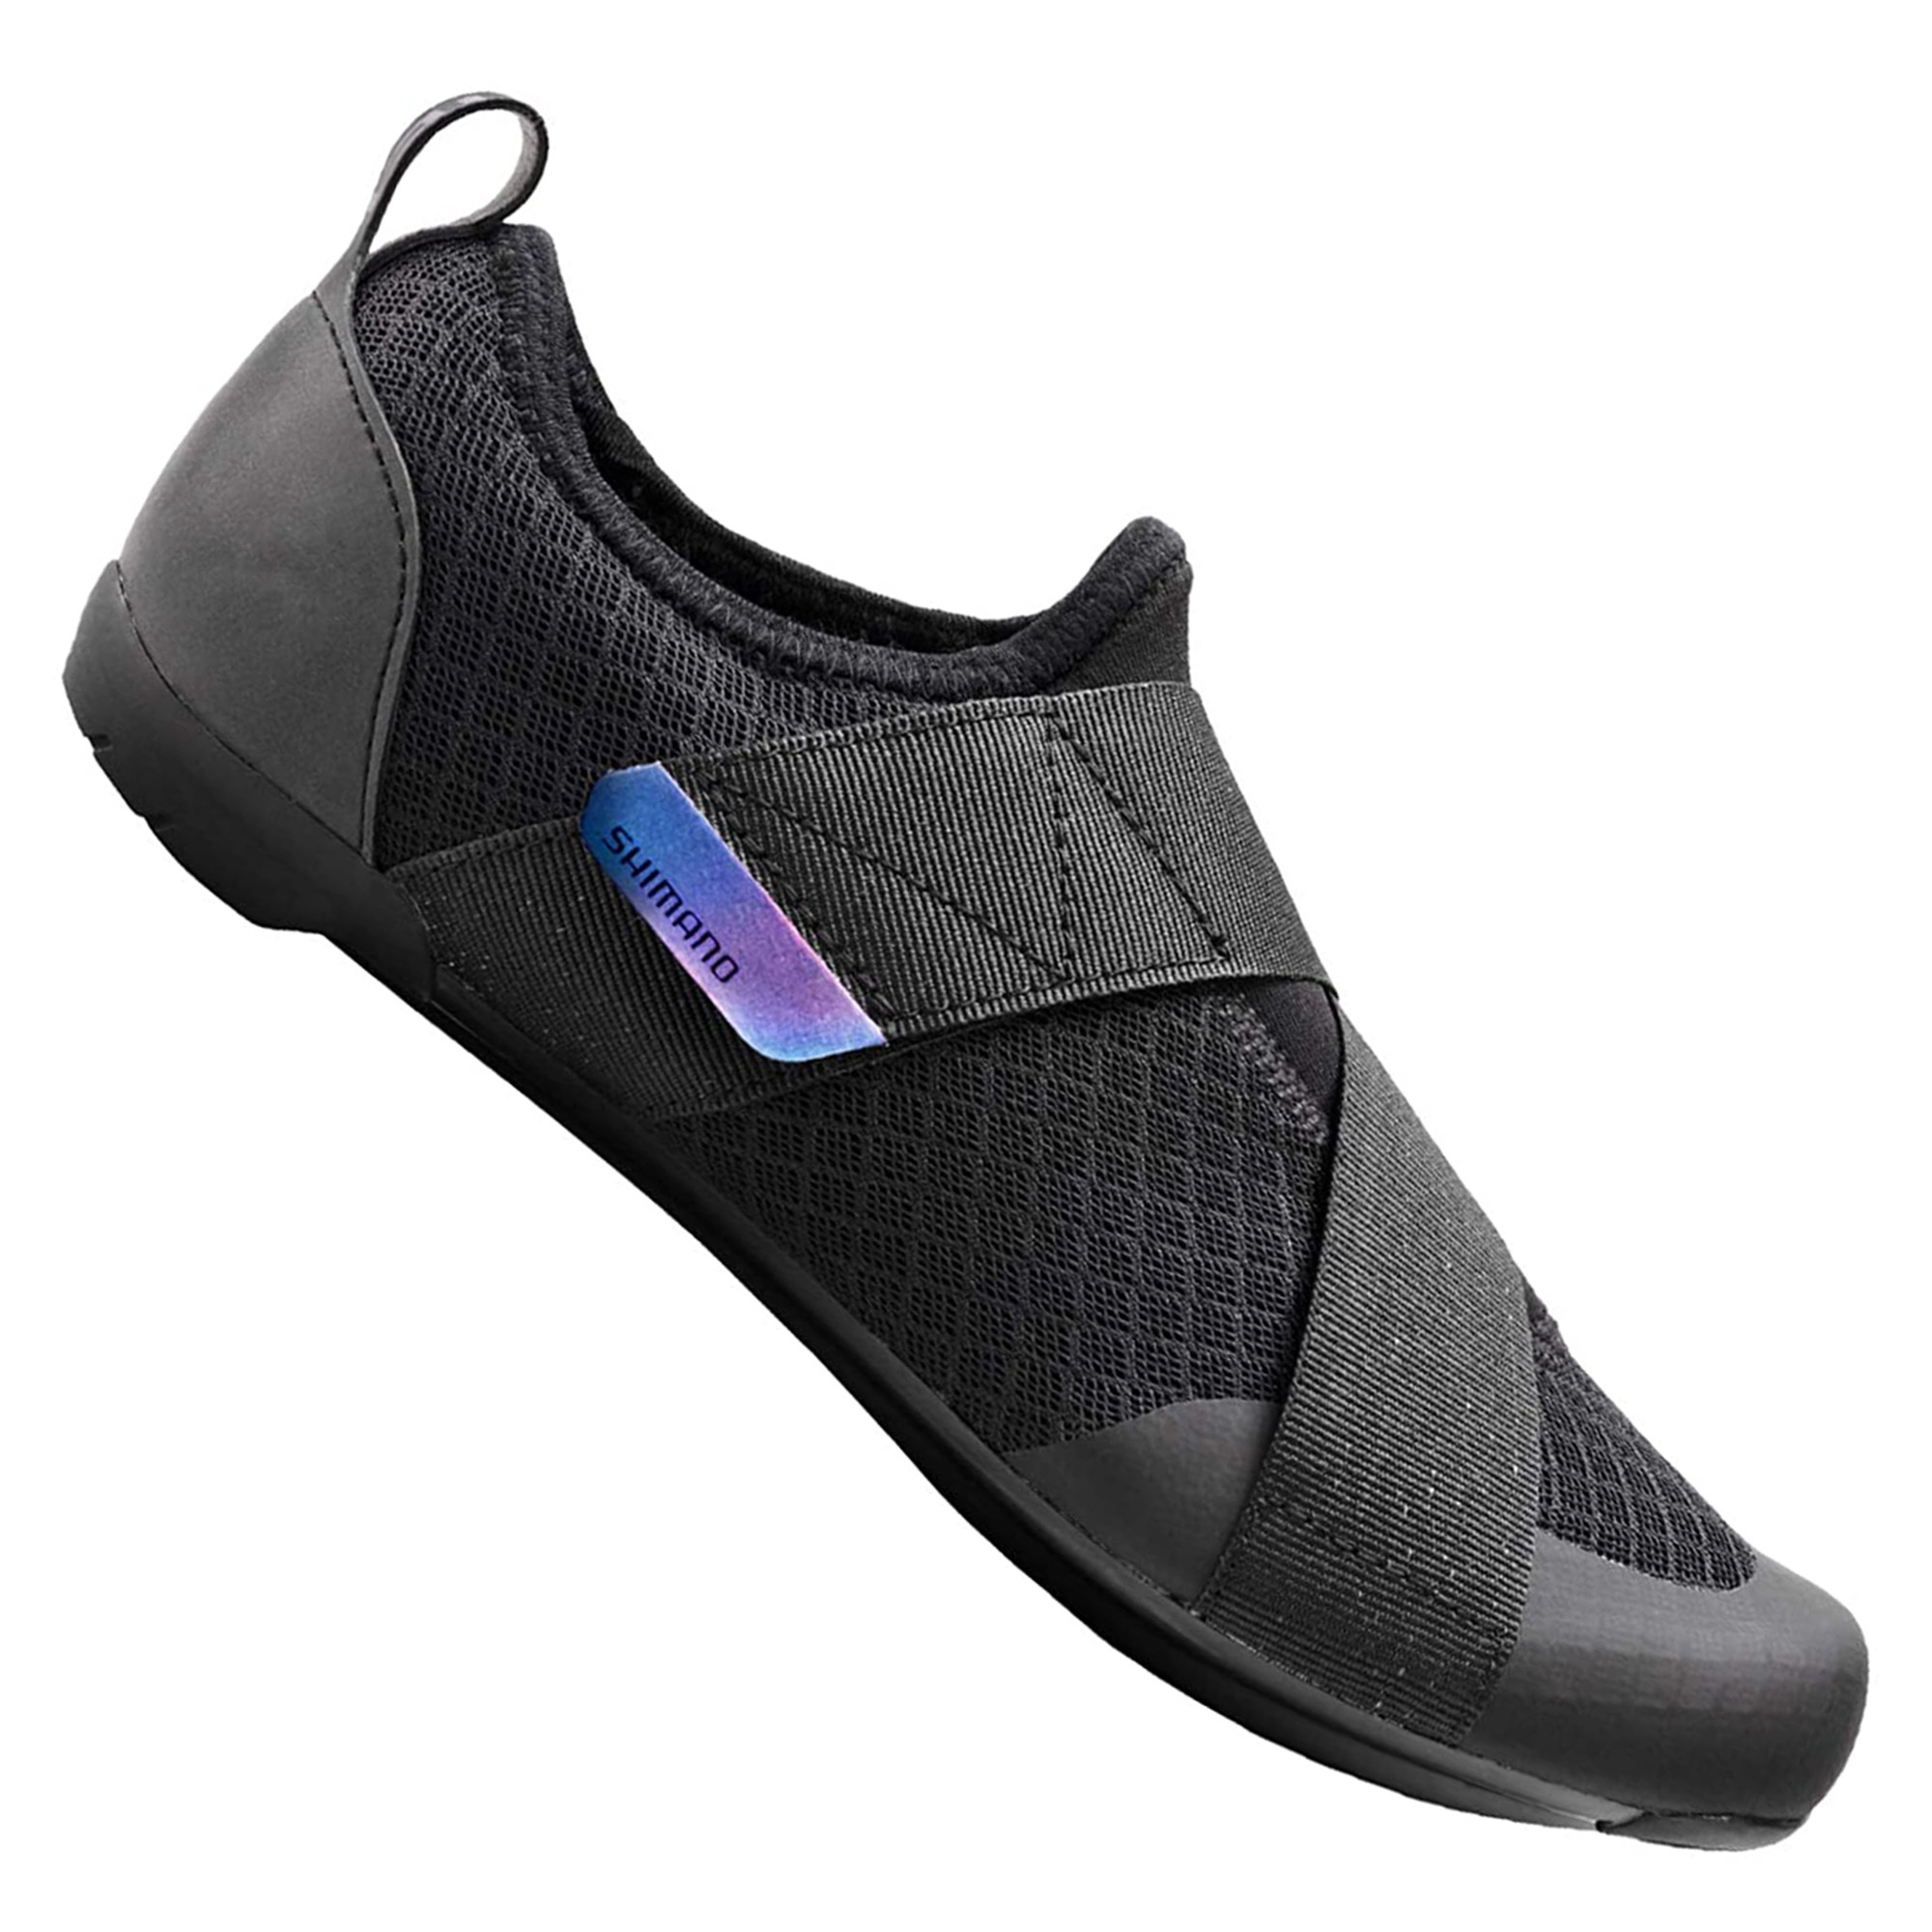 Shimano IC100 Women Road Bike Bicycle Cycling Shoes Black - Compatible with SPD SPD-SL Delta - Size 41